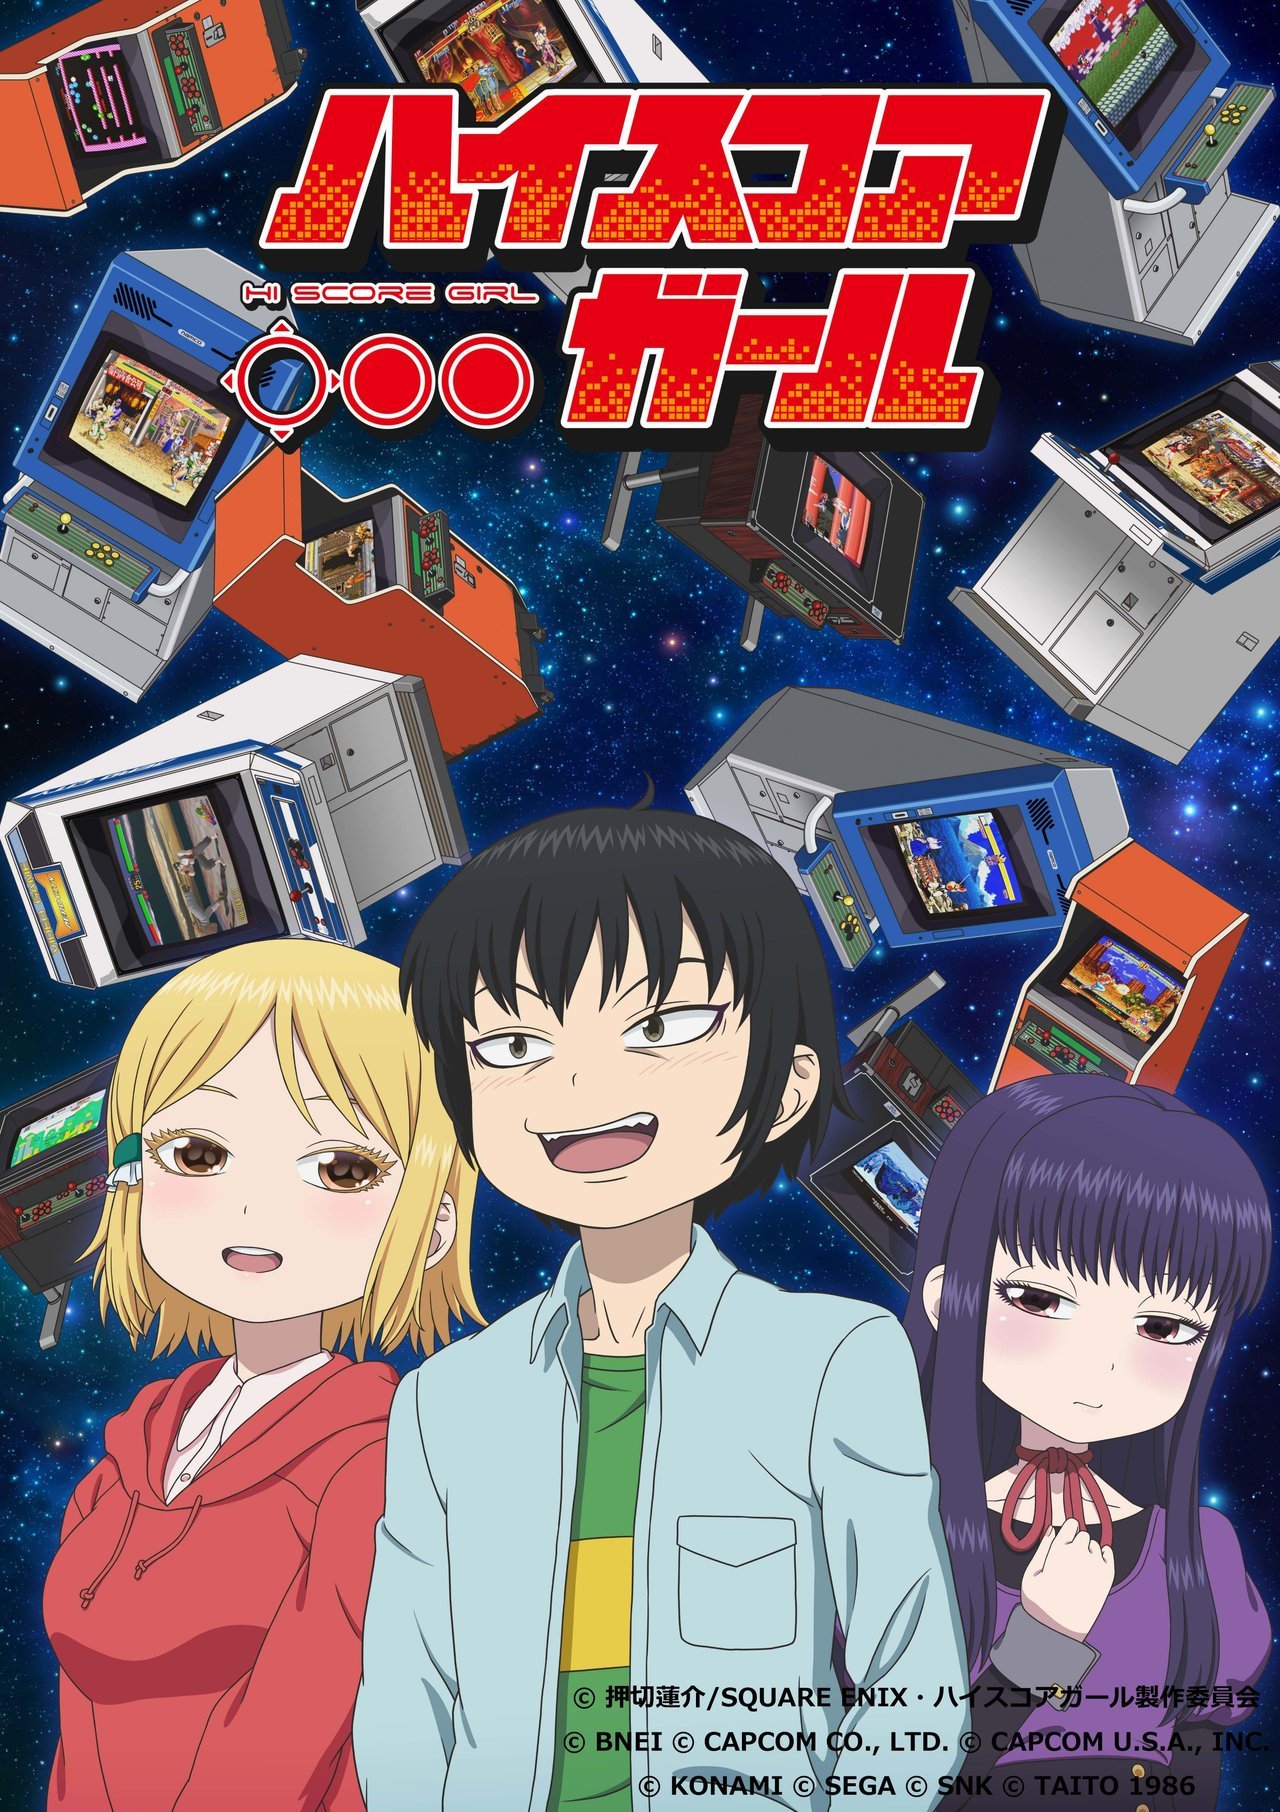 A new key visual for this Summerâs âHigh Score Girlâ TV anime has been revealed. Broadcast premiere July 13th (J.C.Staff)